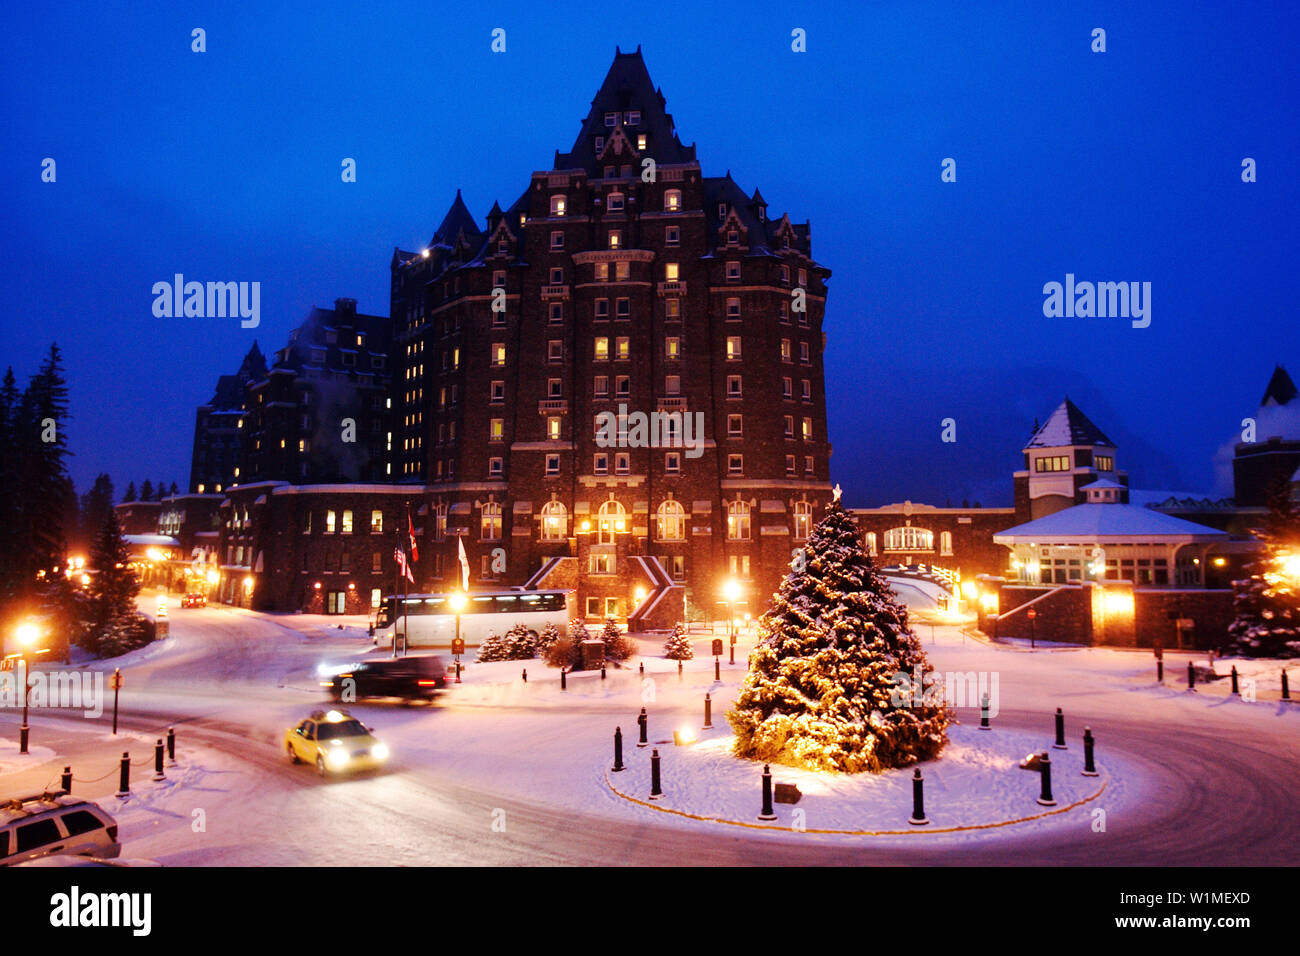 A Big House Building And A Christmas Tree In The Winter Evening Banff Fairmont Springs Hotel Rocky Mountains Alberta Canada North Amerika Stock Photo Alamy